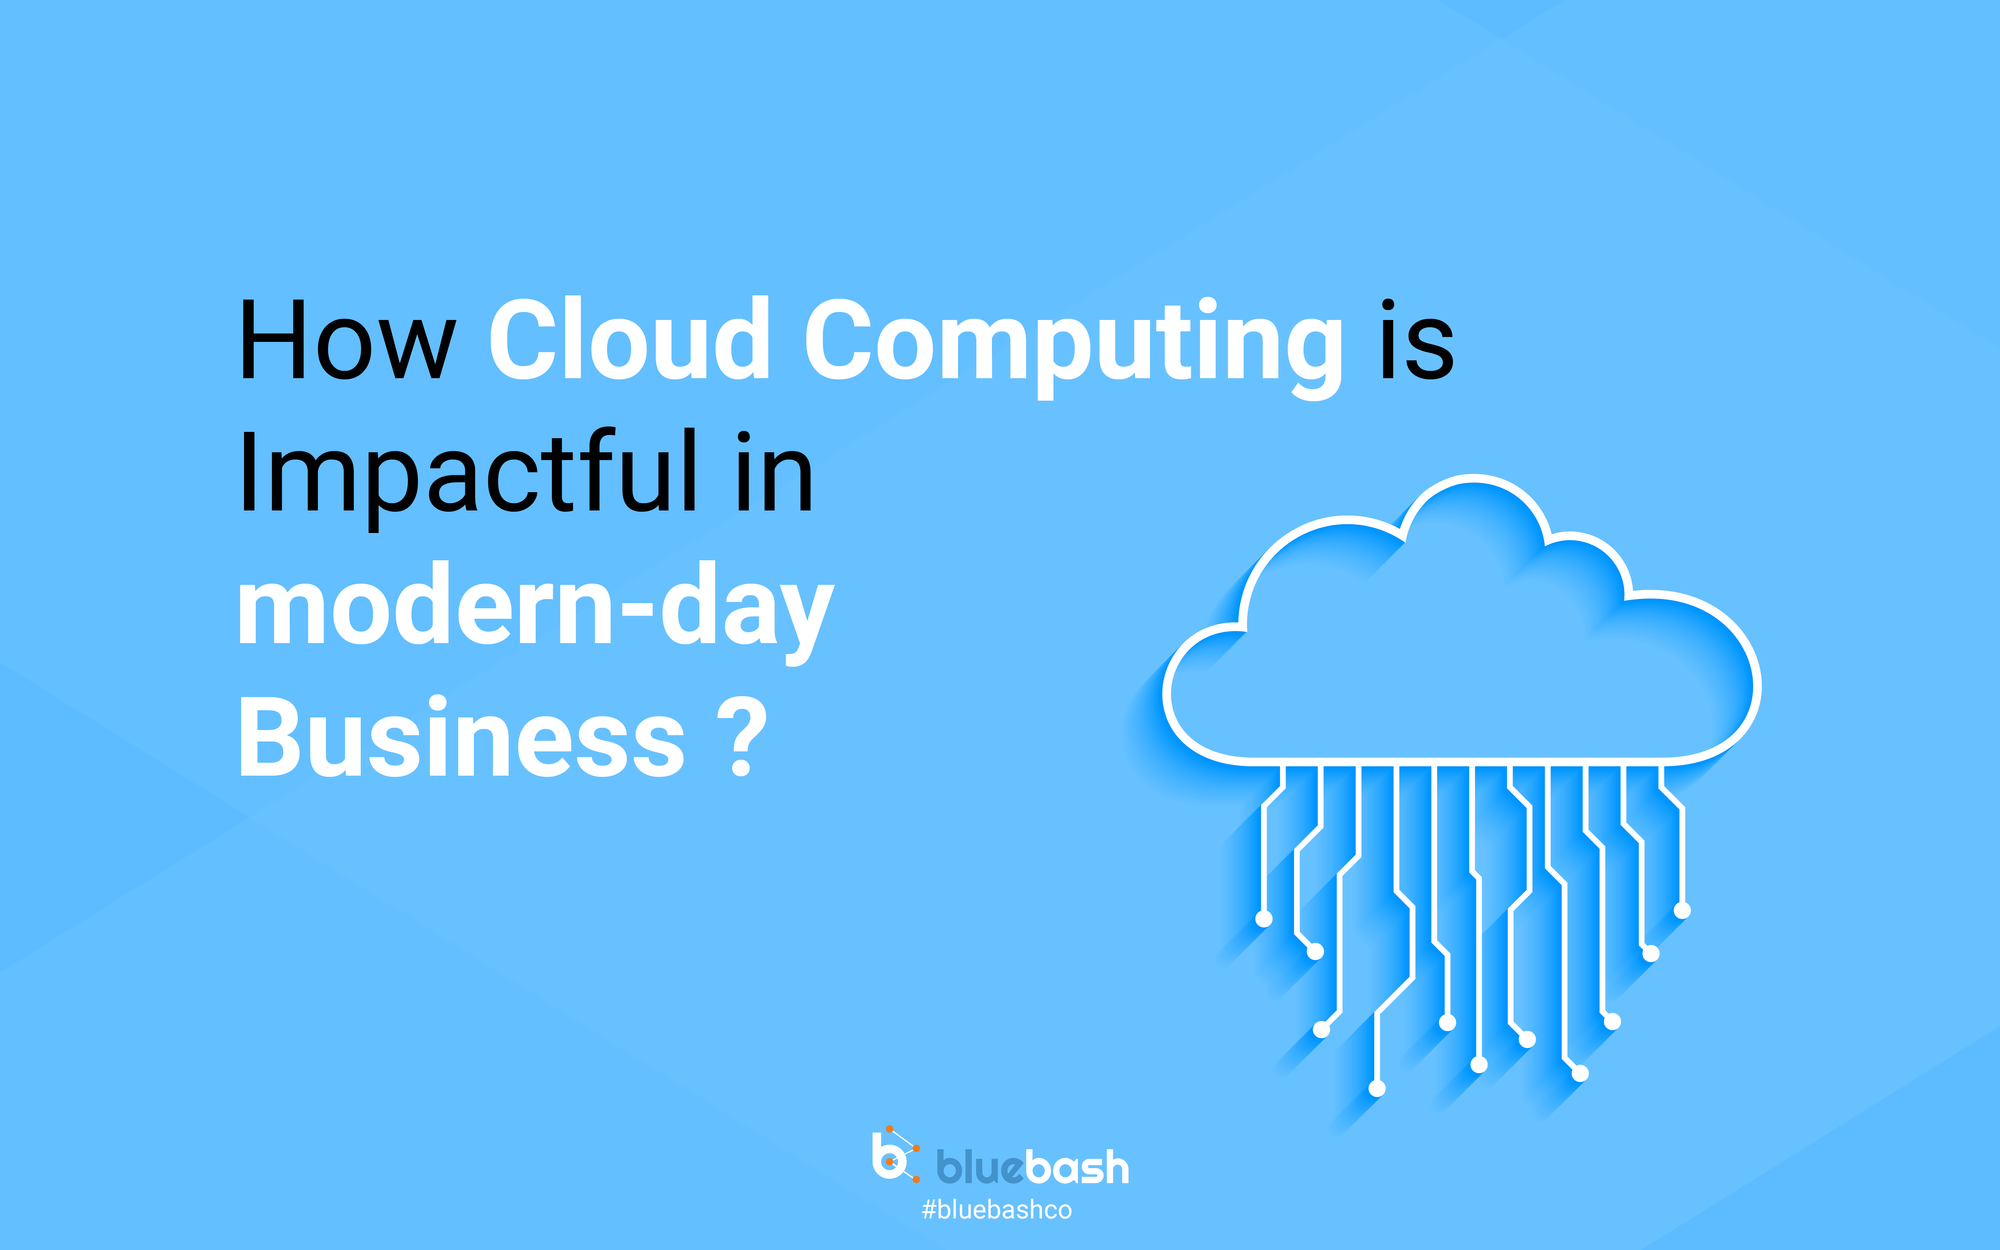 How Cloud Computing is Impactful in modern-day Business?